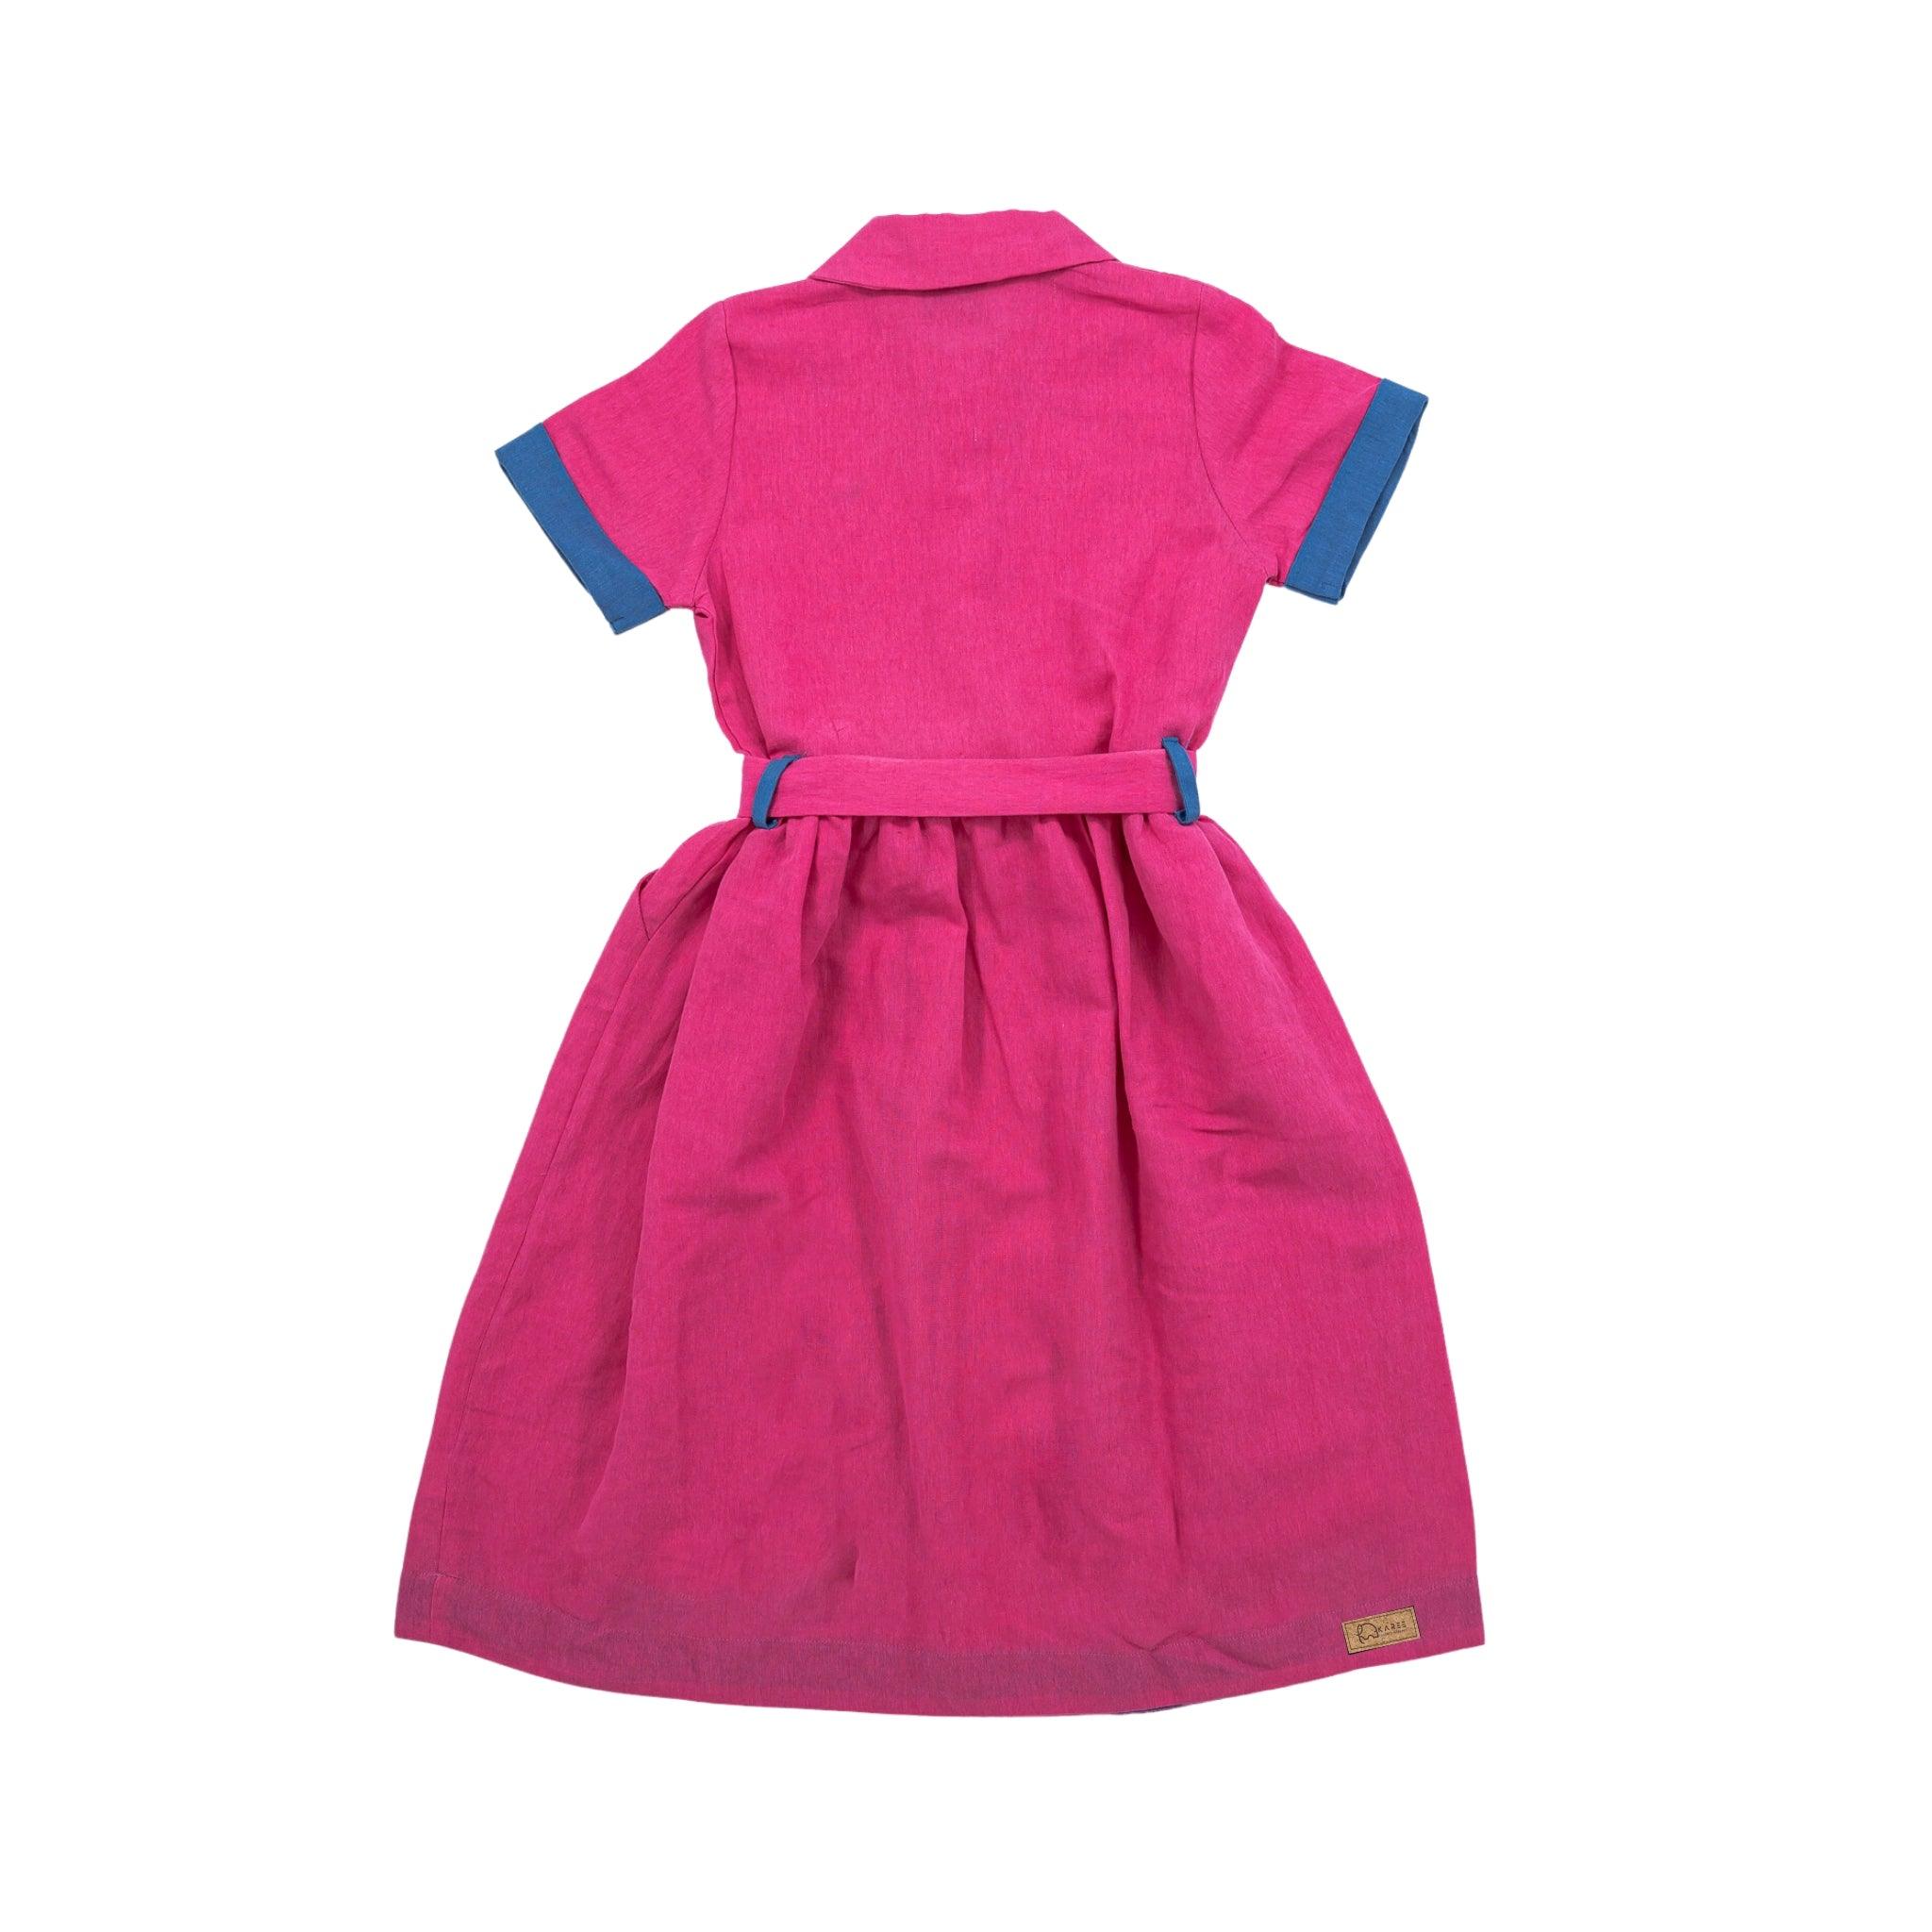 Karee's Fuchsia Purple Linen Dress for Girls with blue cuffs and belt, displayed on a white background.